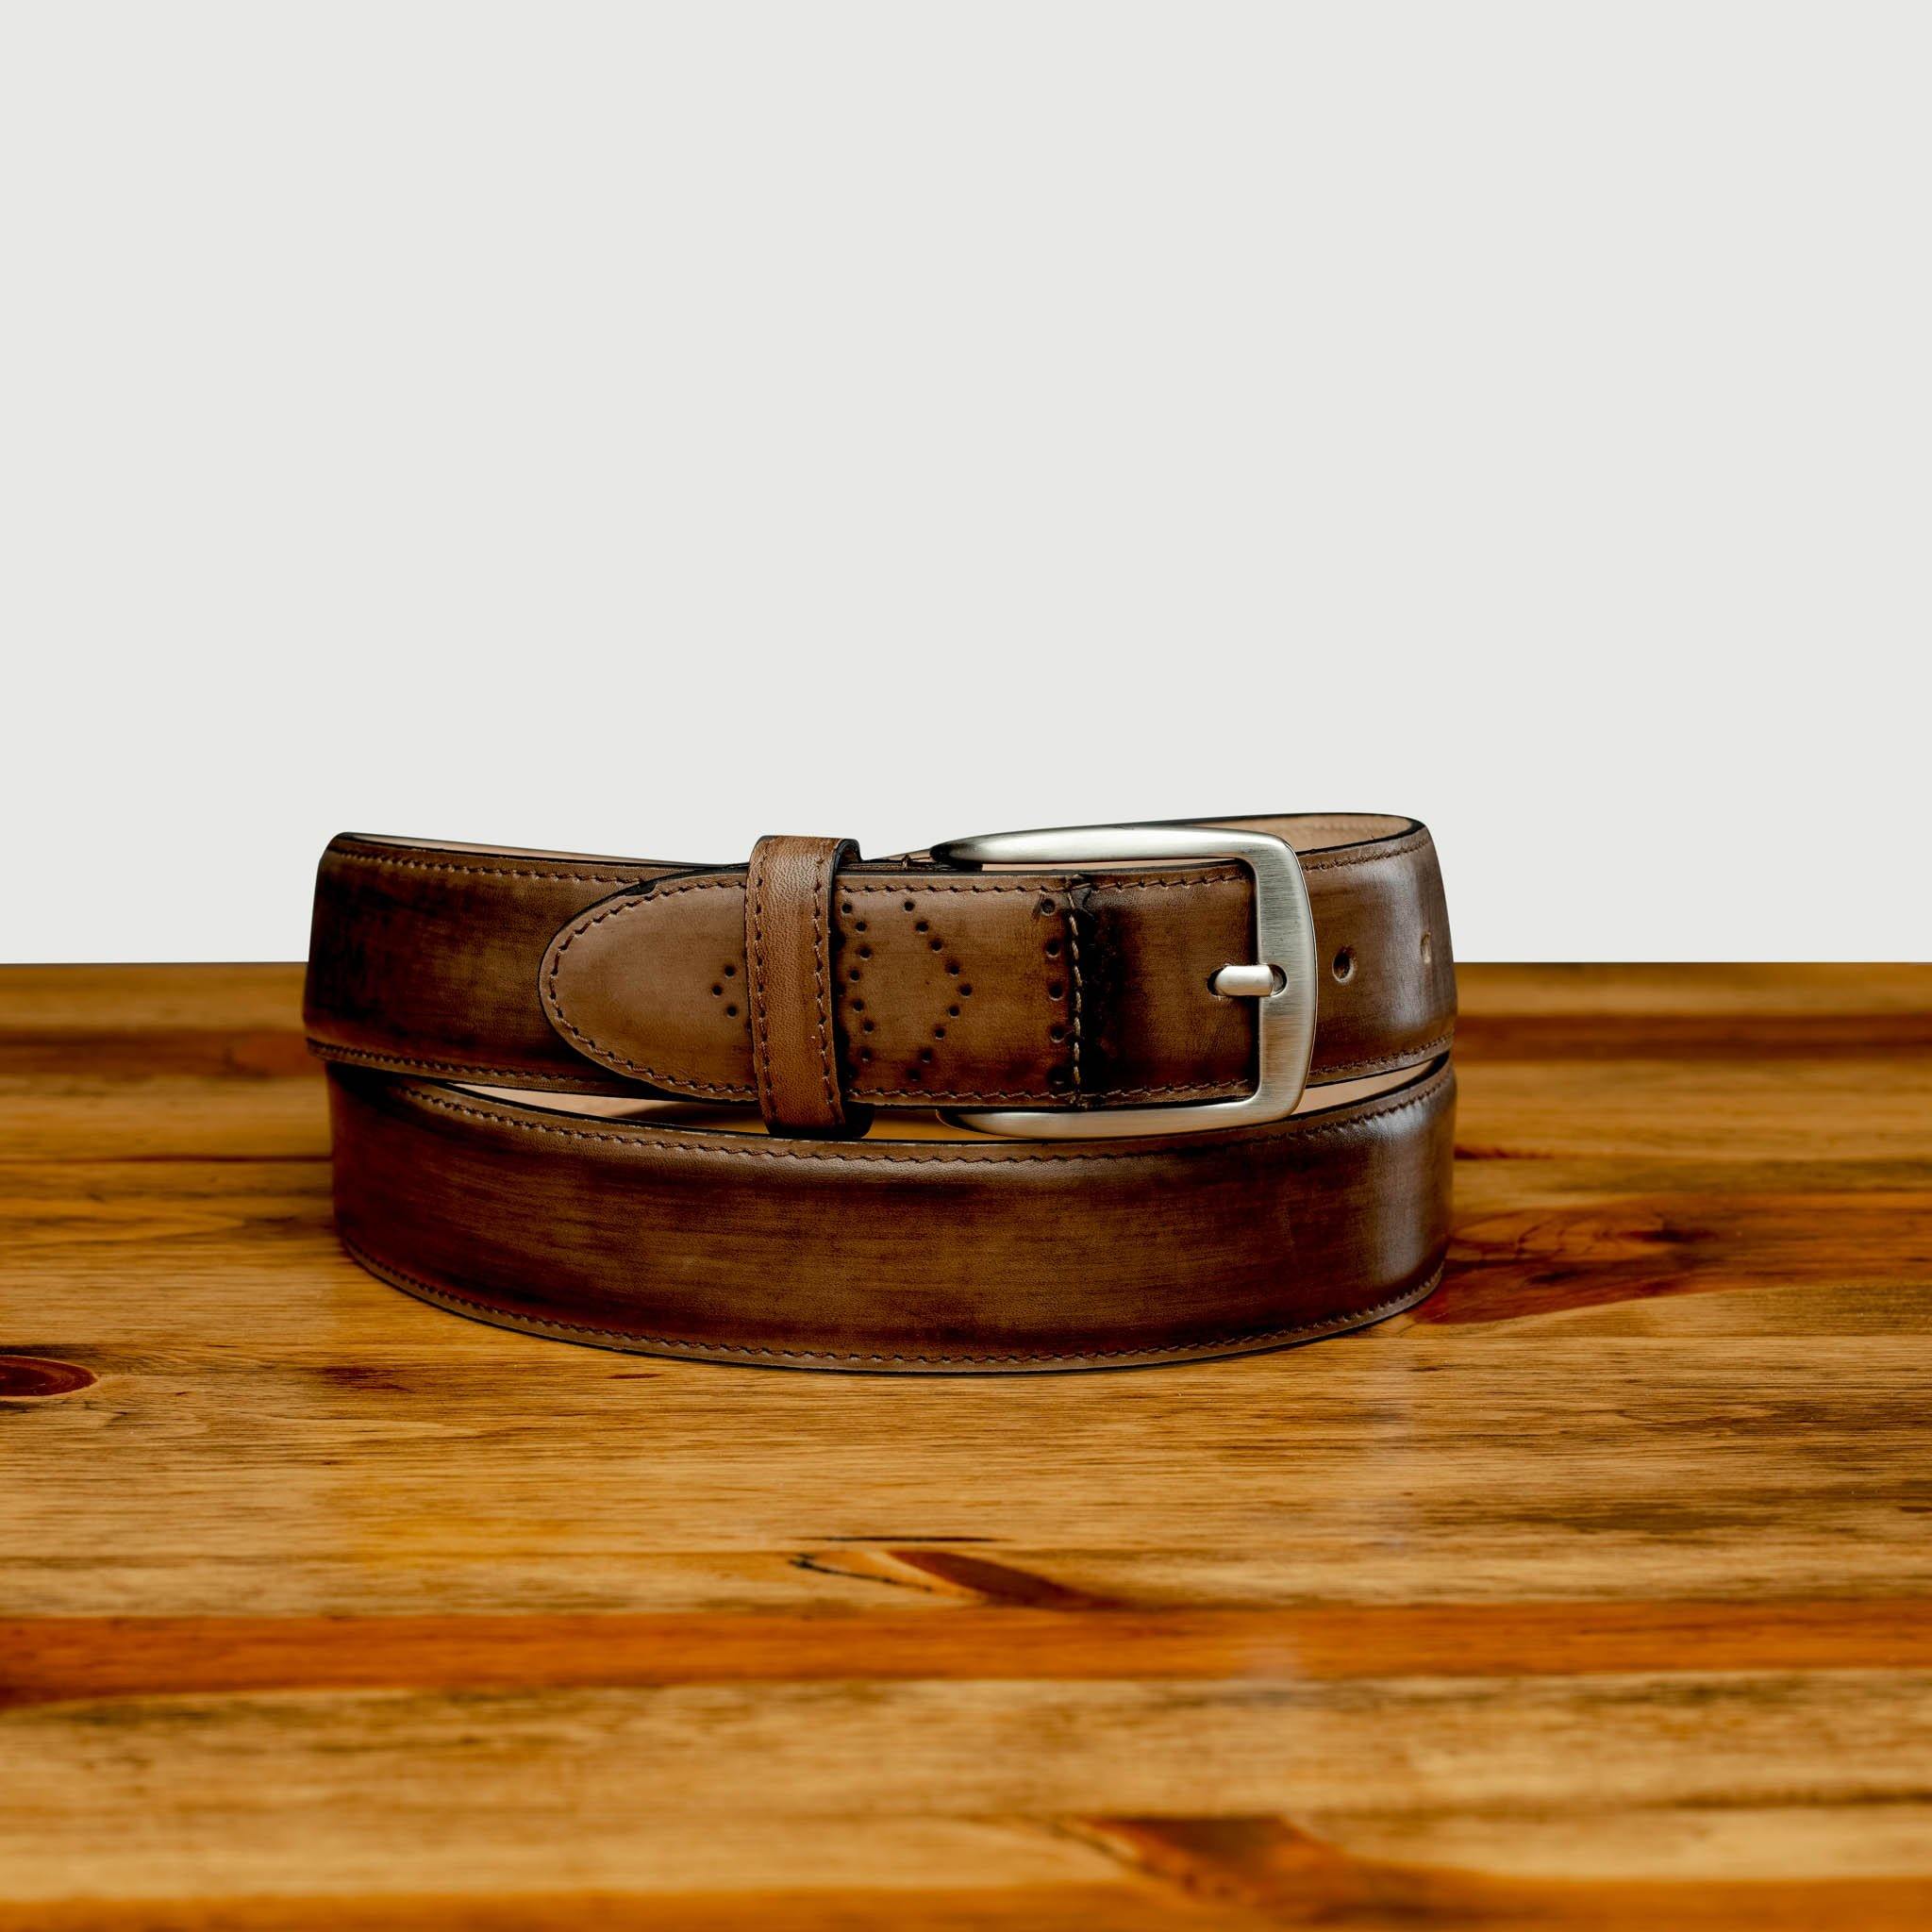 Front profile of C5677 Calzoleria Toscana Brown Artisan Dress Belt curled up on top of a wooden table